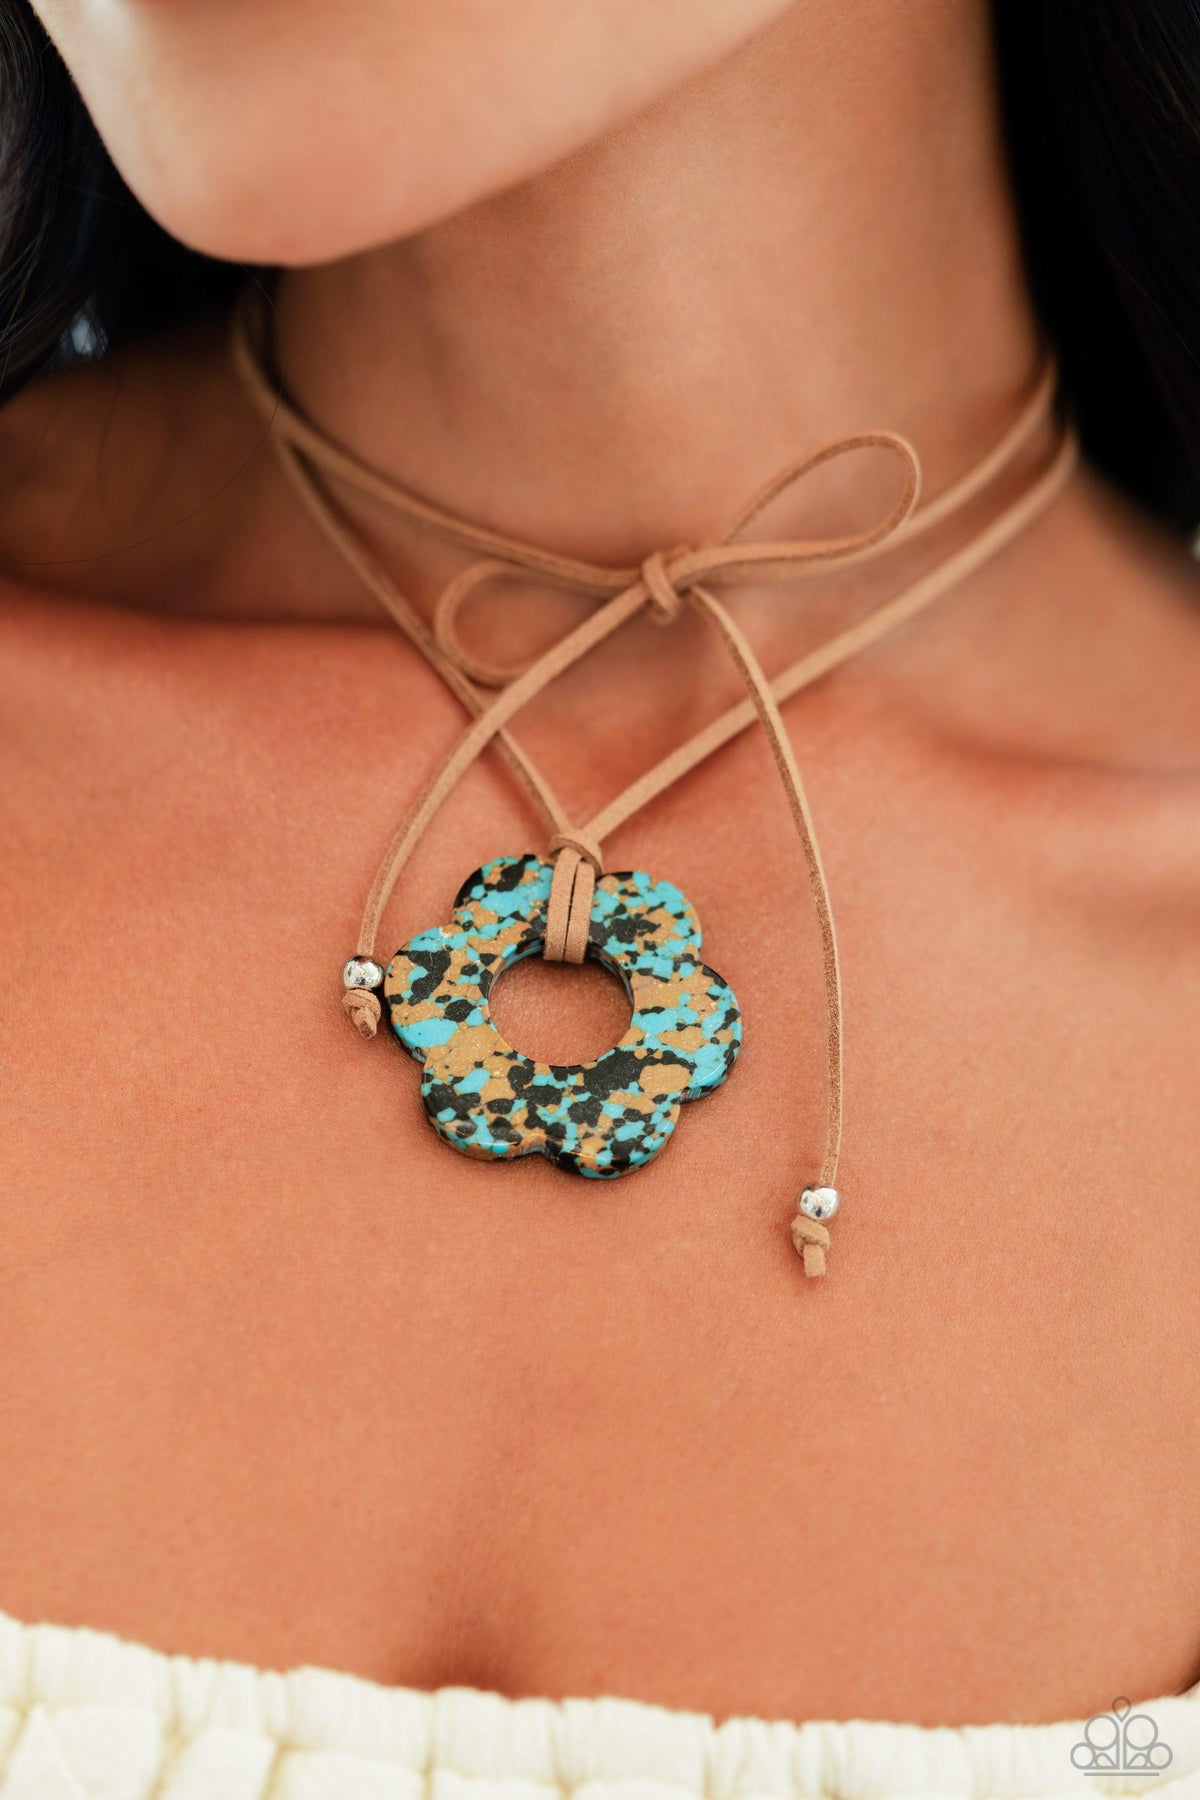 Tied Triumph Brown &amp; Turquoise Blue Stone Flower Necklace - Paparazzi Accessories-on model - CarasShop.com - $5 Jewelry by Cara Jewels